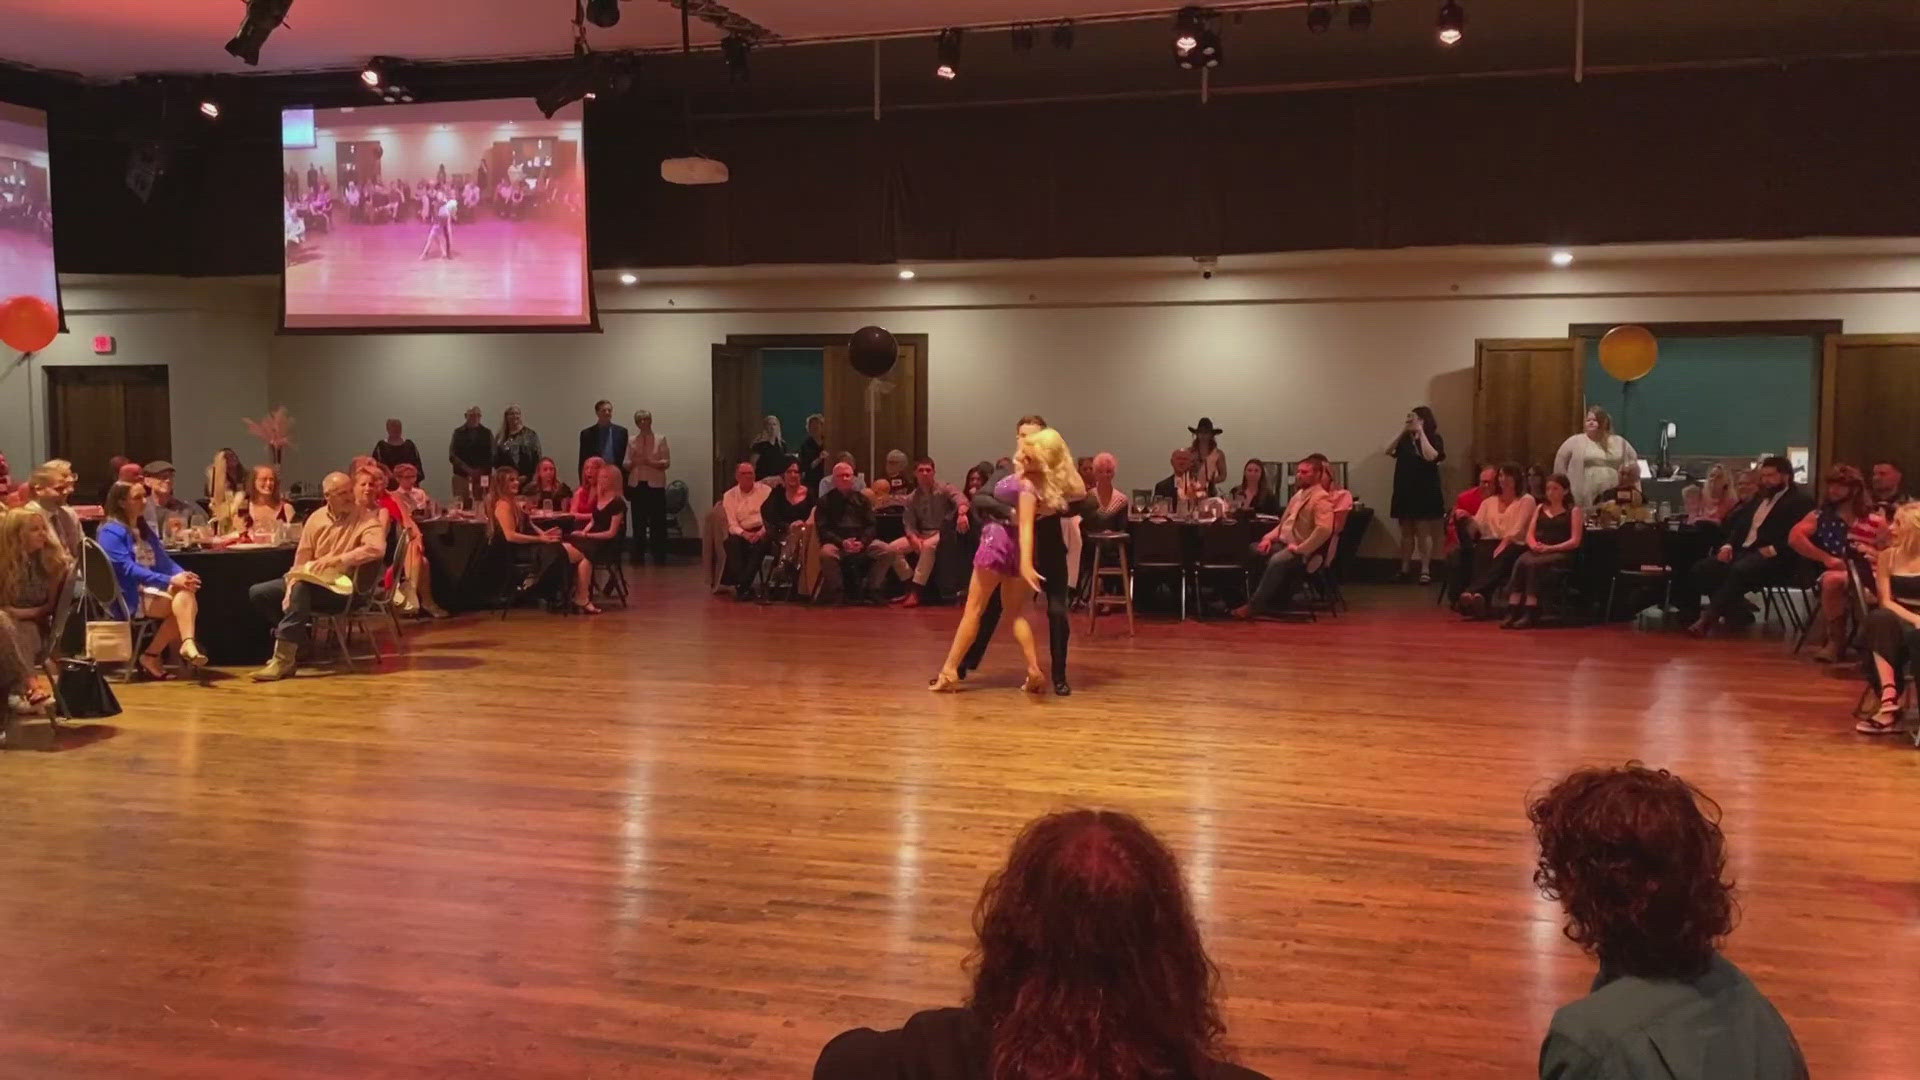 Brittney Bailey danced for the horses Friday night!